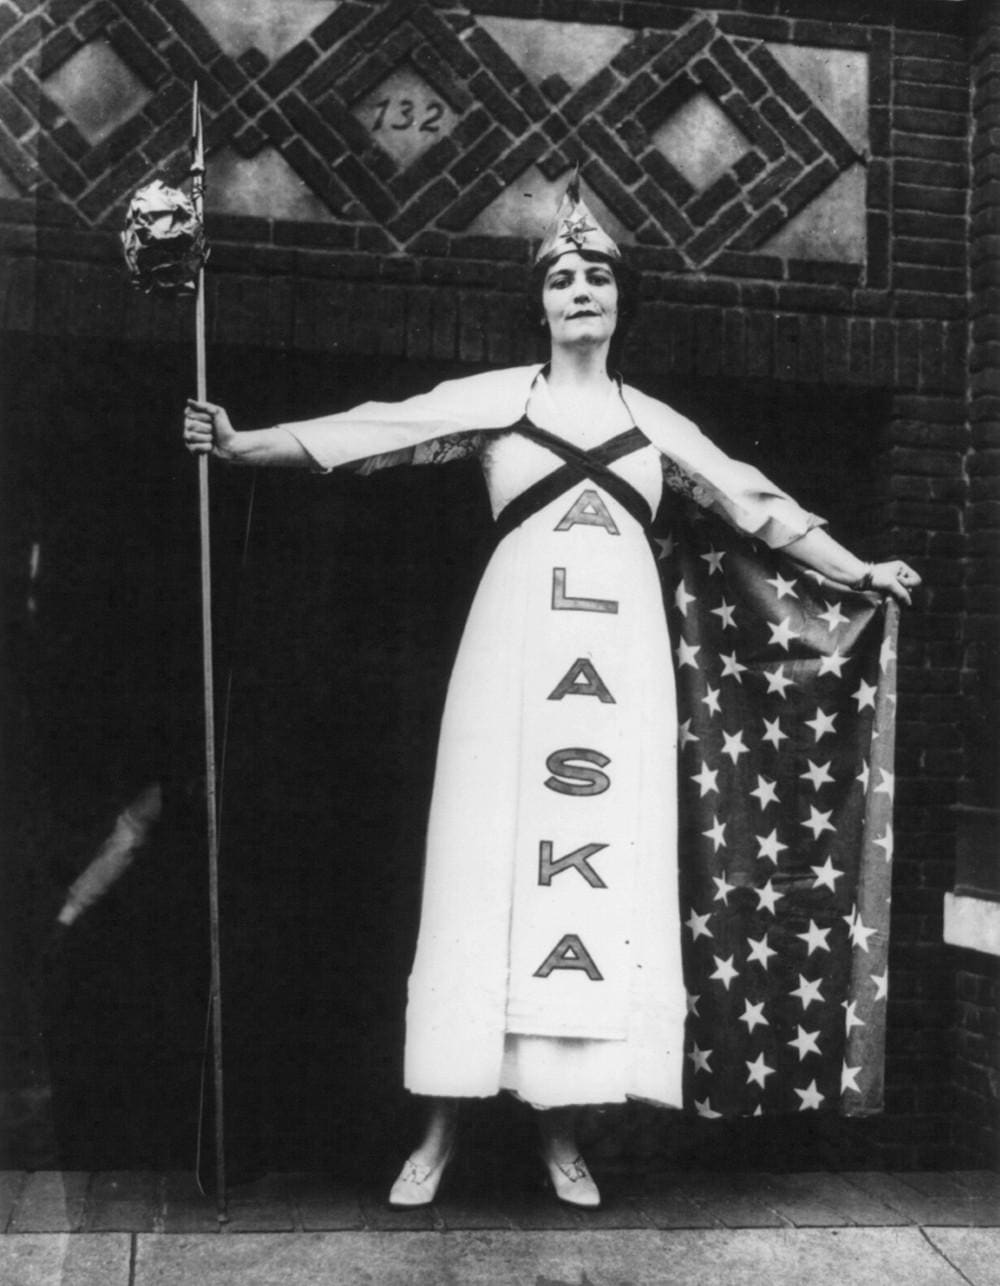 Margaret Vale, niece of Pres. Wilson, in Suffrage parade, New York, Oct. 1915. Representing Alaska, which granted women's suffrage in 1913.